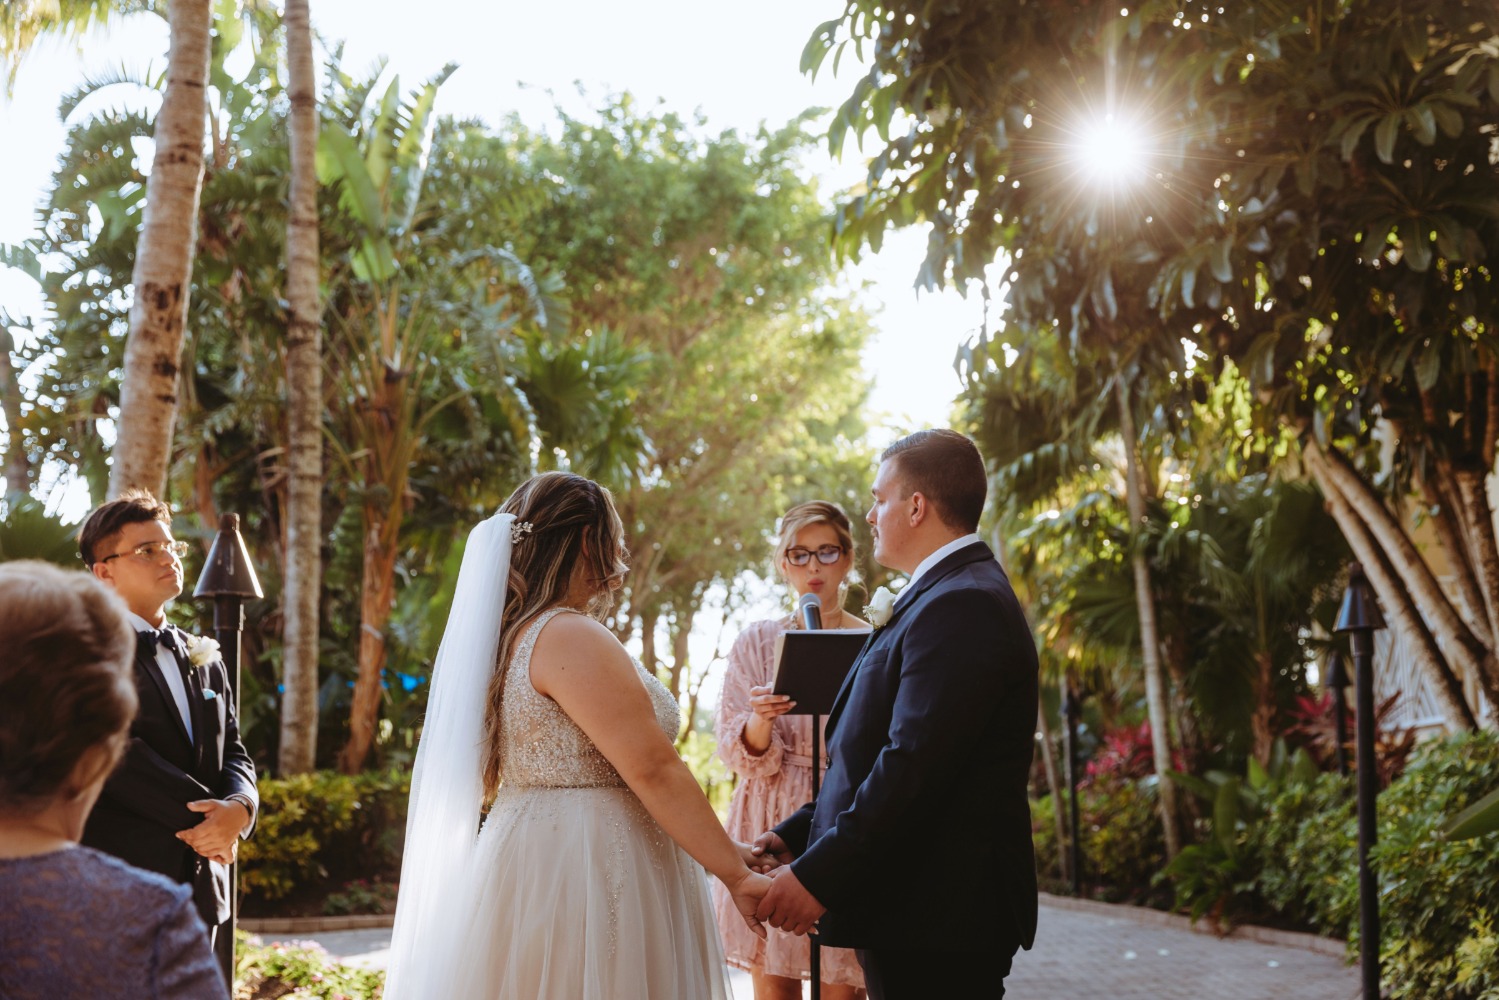 Hyatt Regency Coconut Point is the Perfect Venue and Here's Why